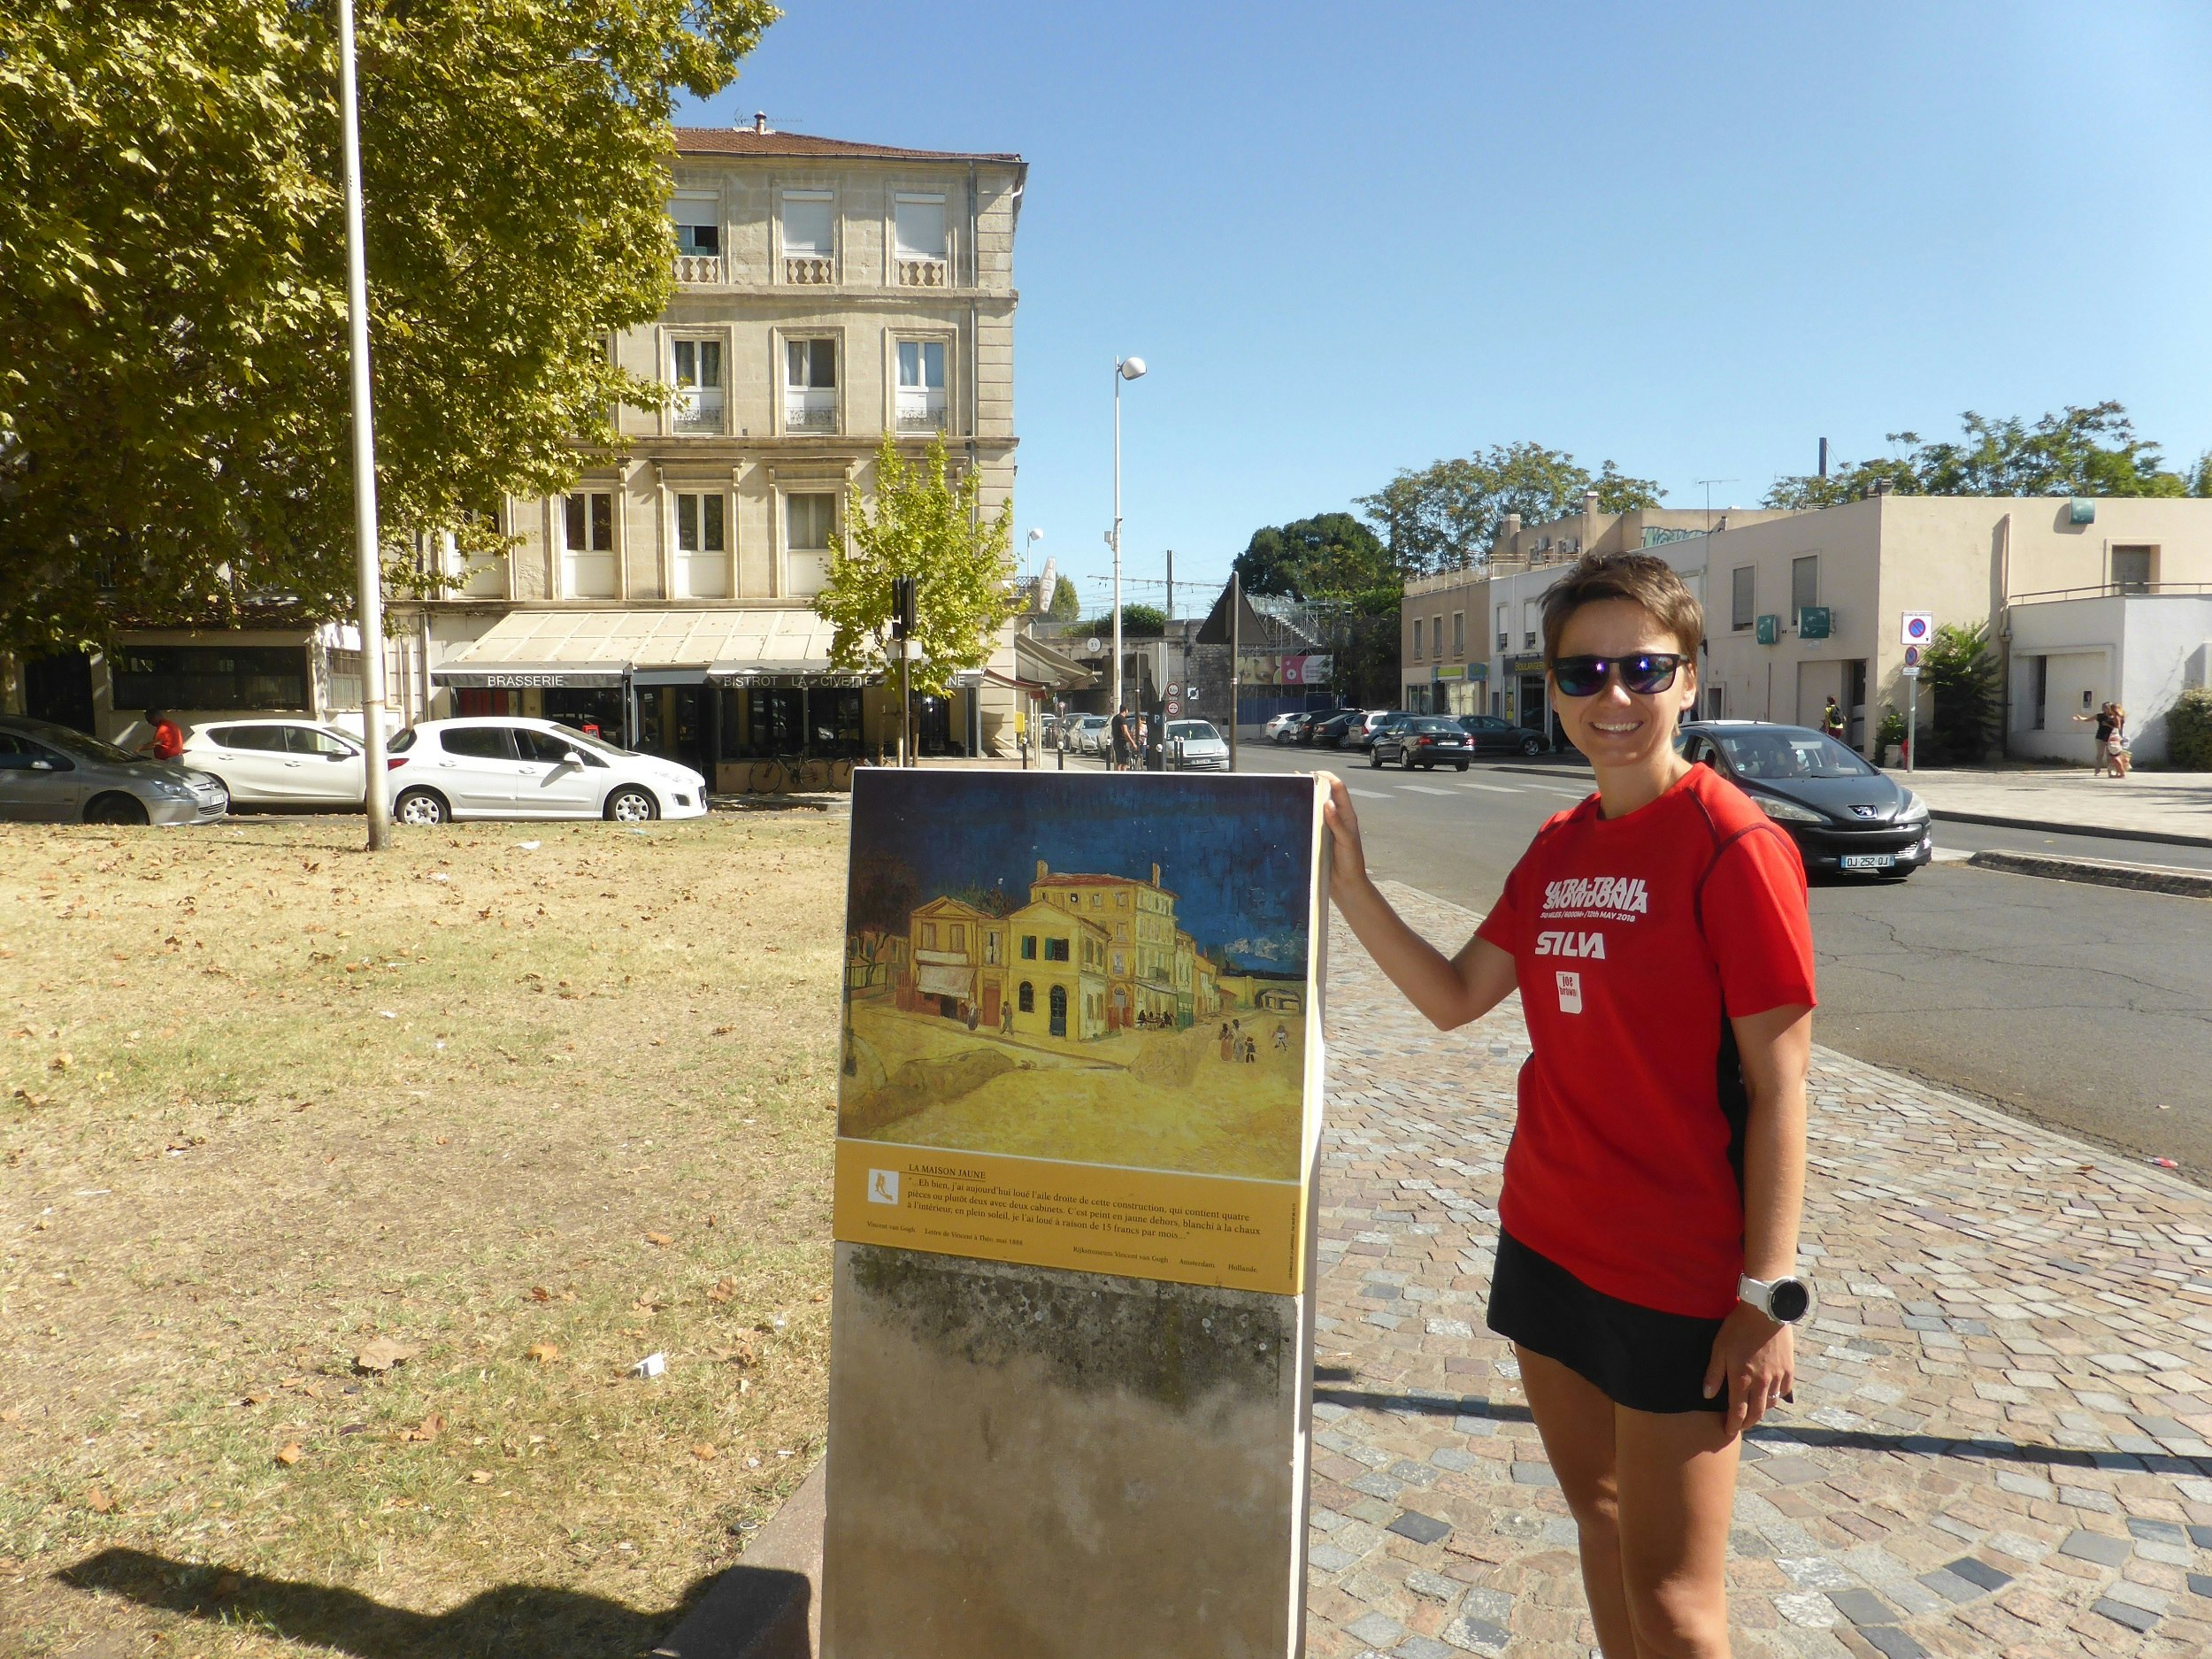 Alecsa standing by a public sign denoting the building featured in Van Gogh's The Yellow House; in the background is the same house.